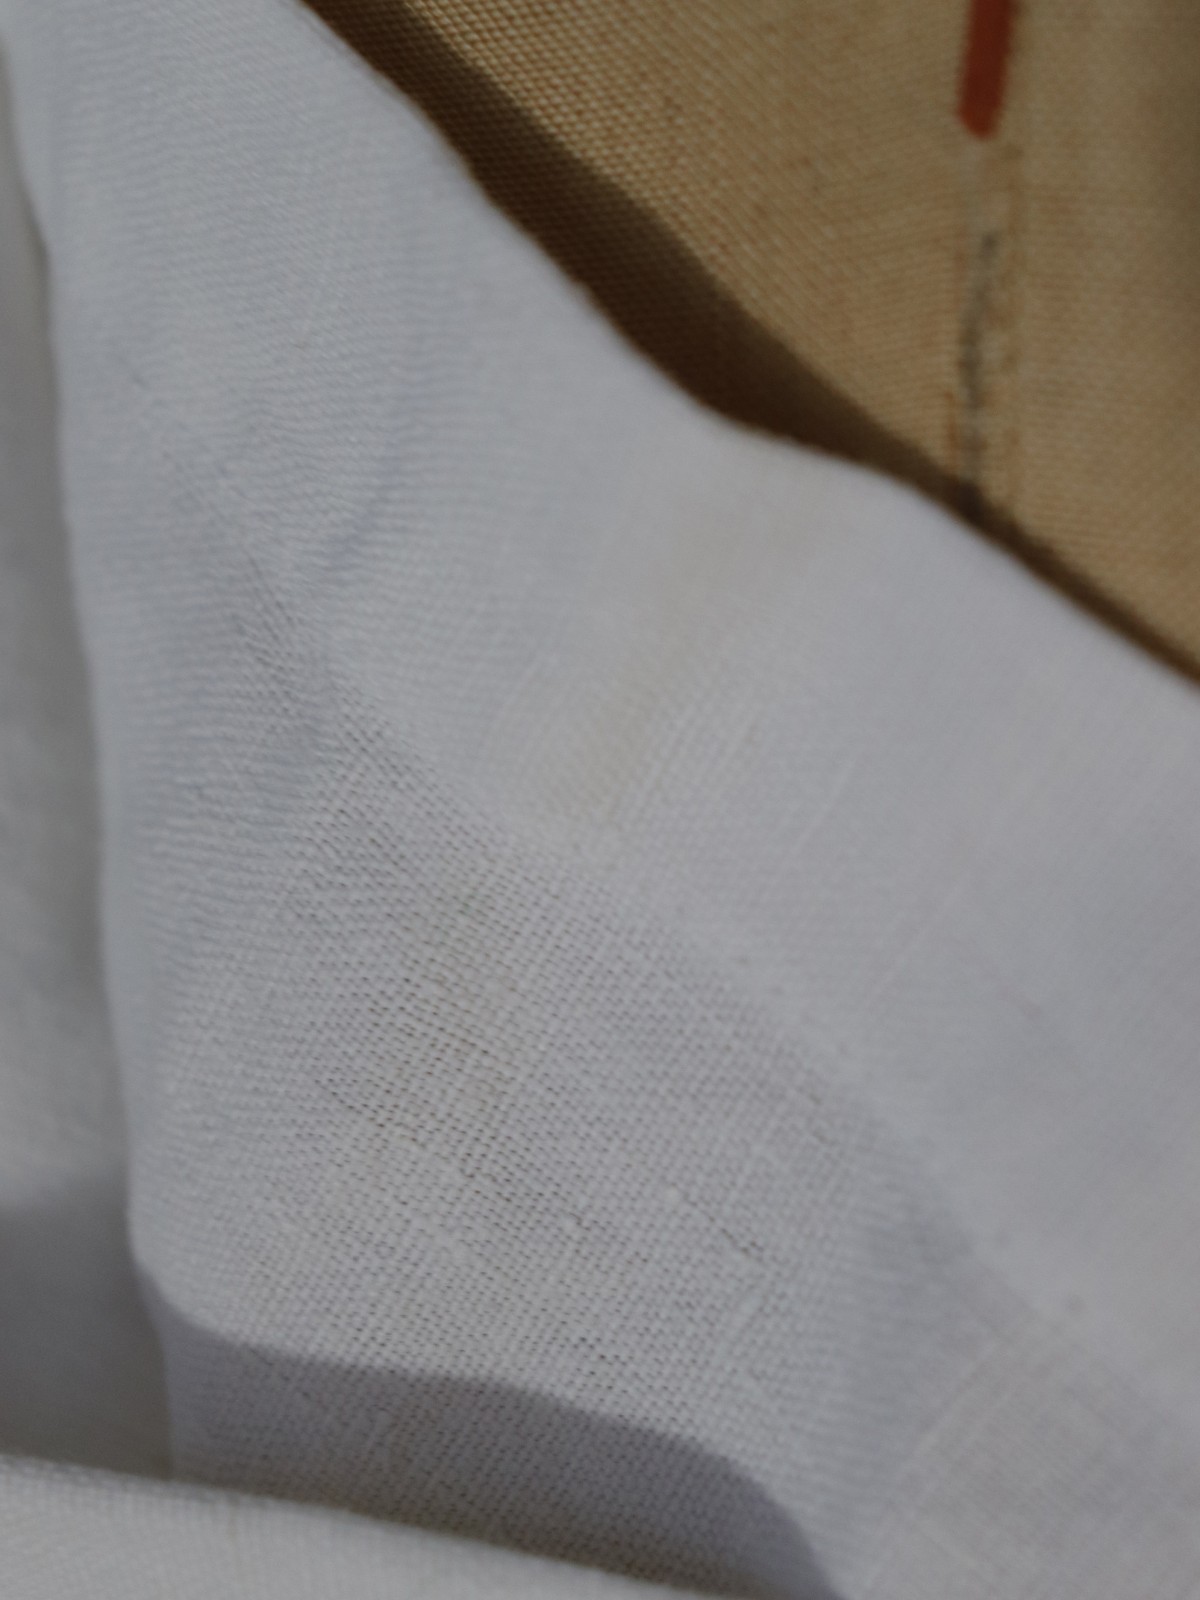 vintage french linen fabric, brown.remake,